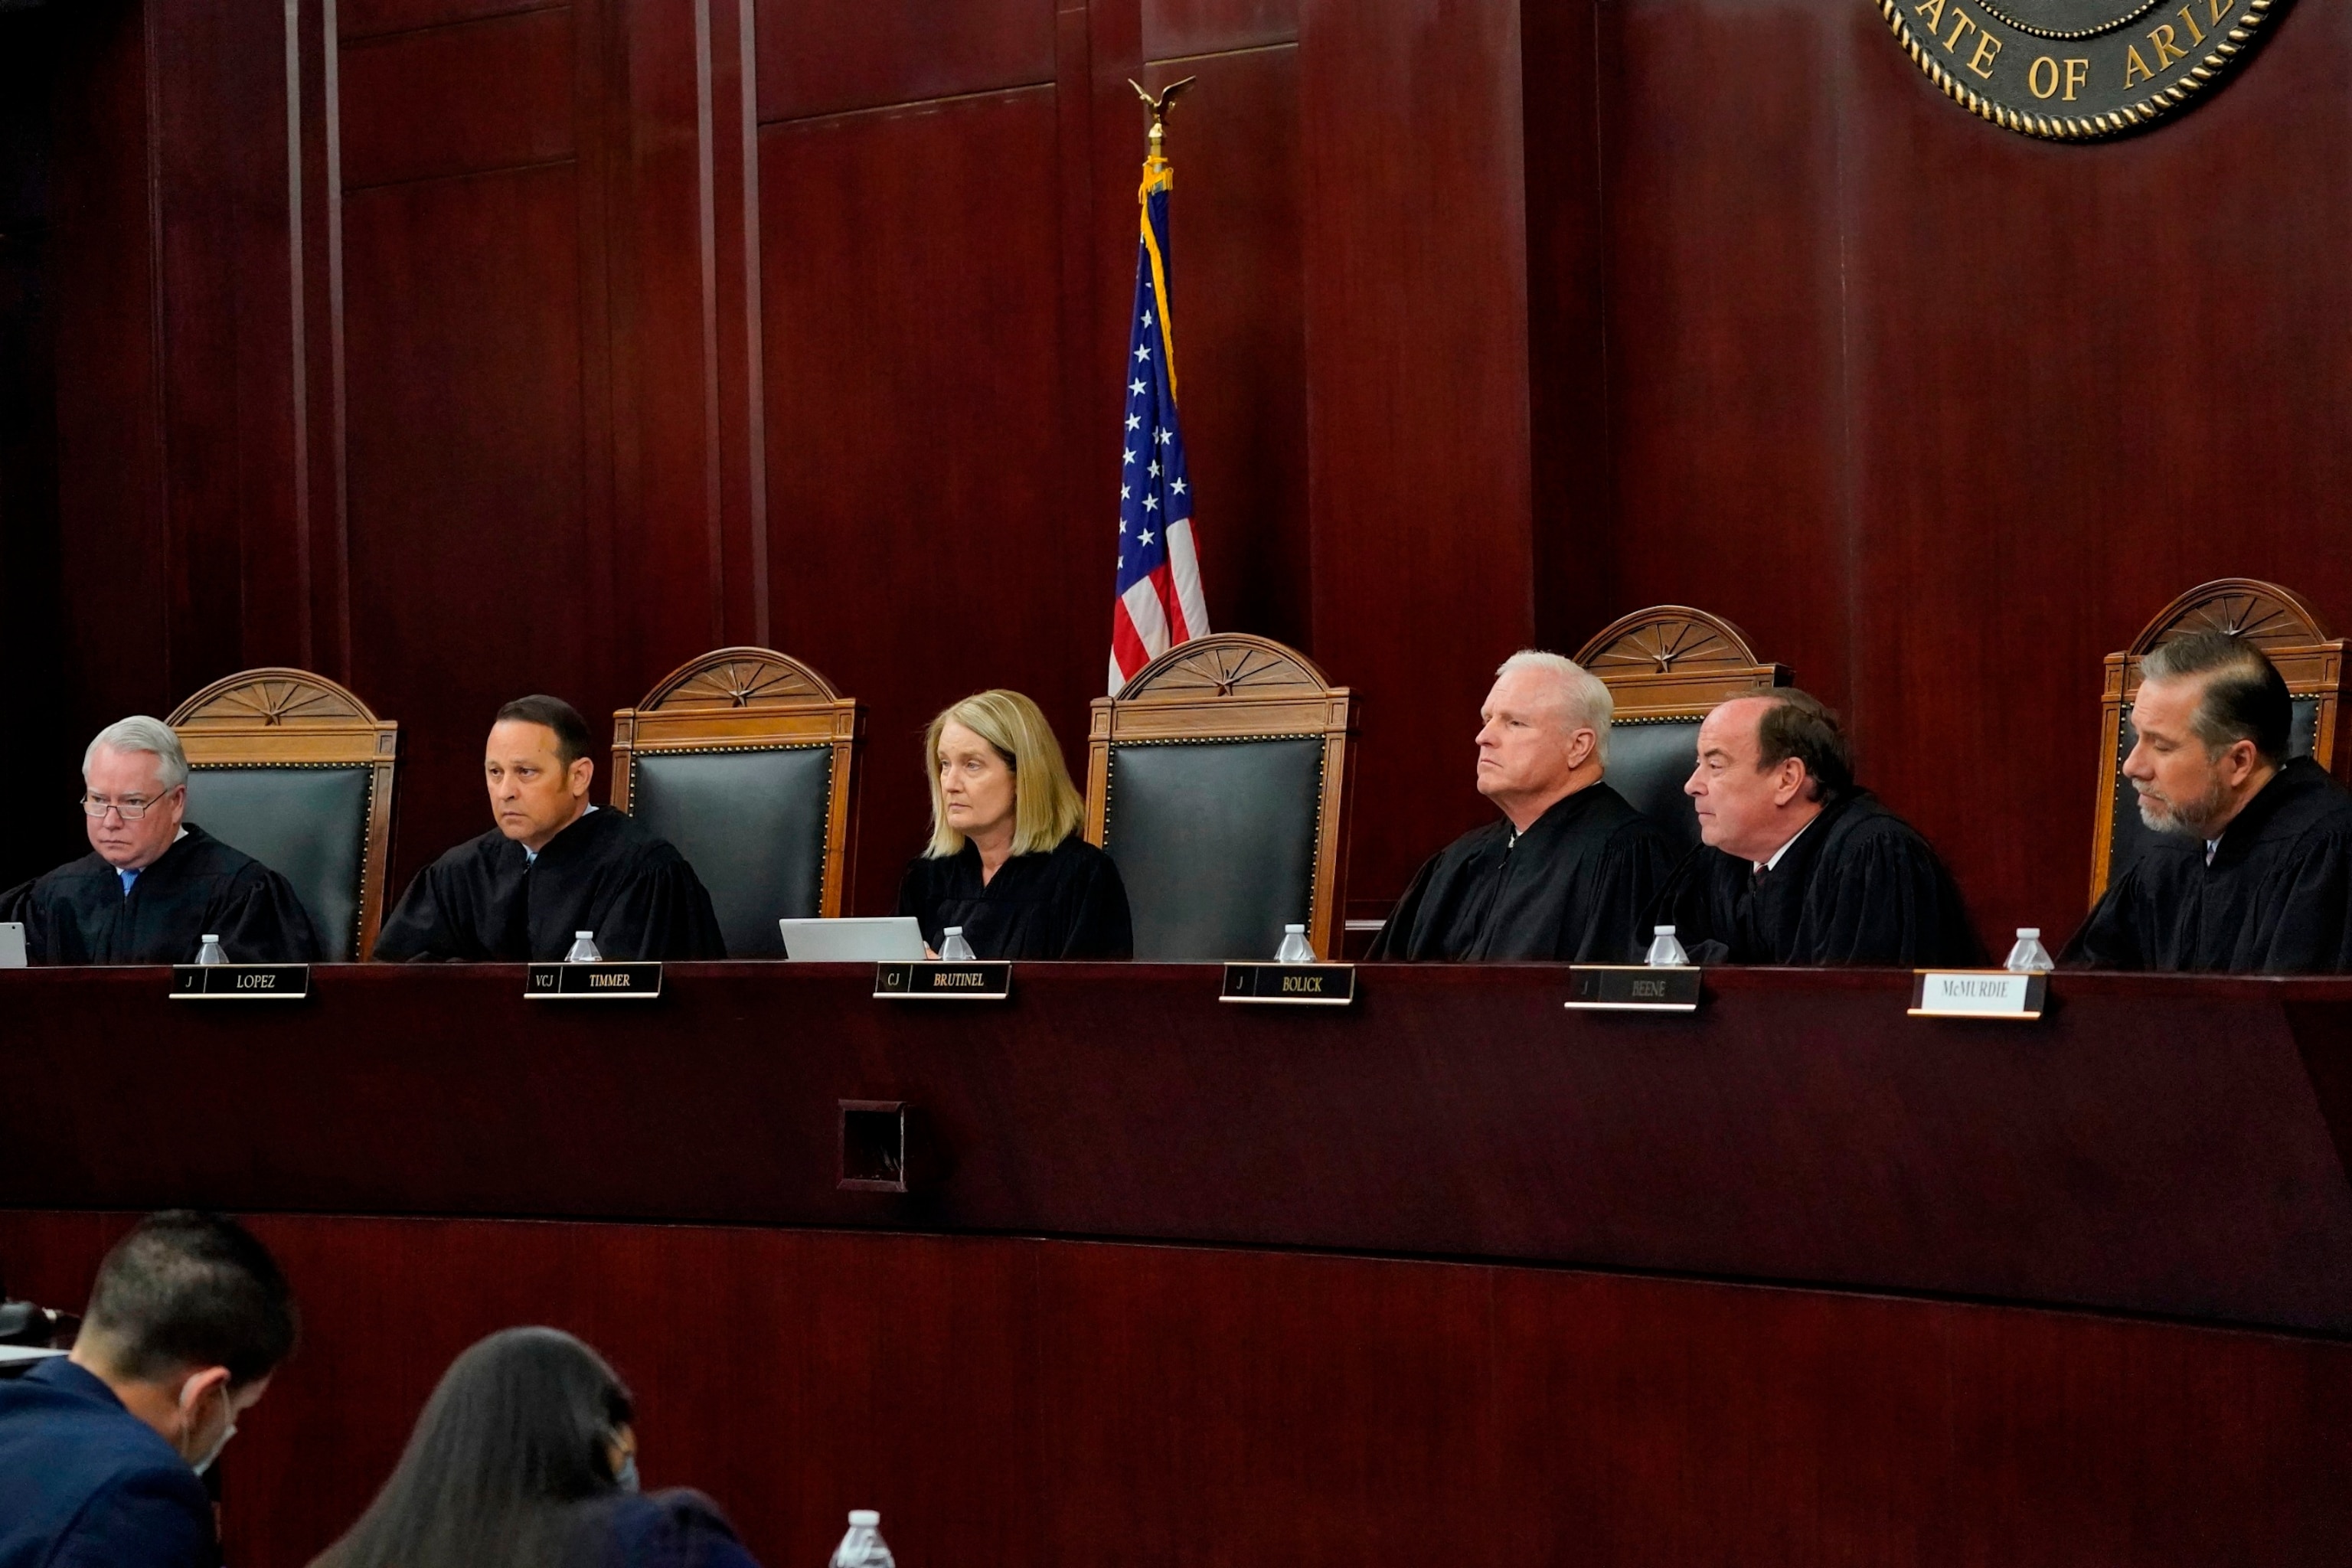 PHOTO: Arizona Supreme Court Justices from left; William G. Montgomery, John R Lopez IV, Vice Chief Justice Ann A. Scott Timmer, Chief Justice Robert M. Brutinel, Clint Bolick and James Beene listen to oral arguments on April 20, 2021, in Phoenix.